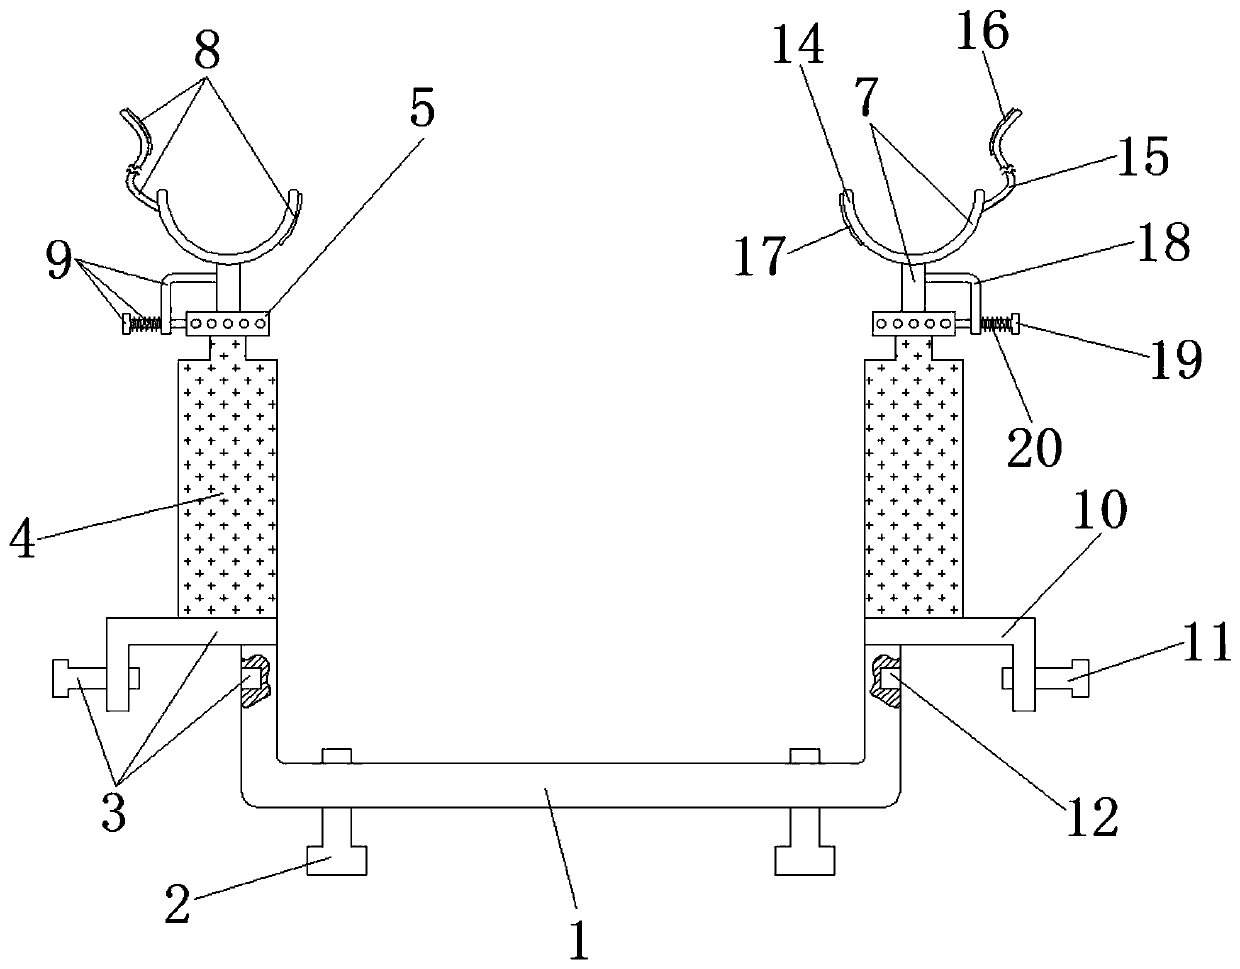 Leg and foot support device for gynecologic examination